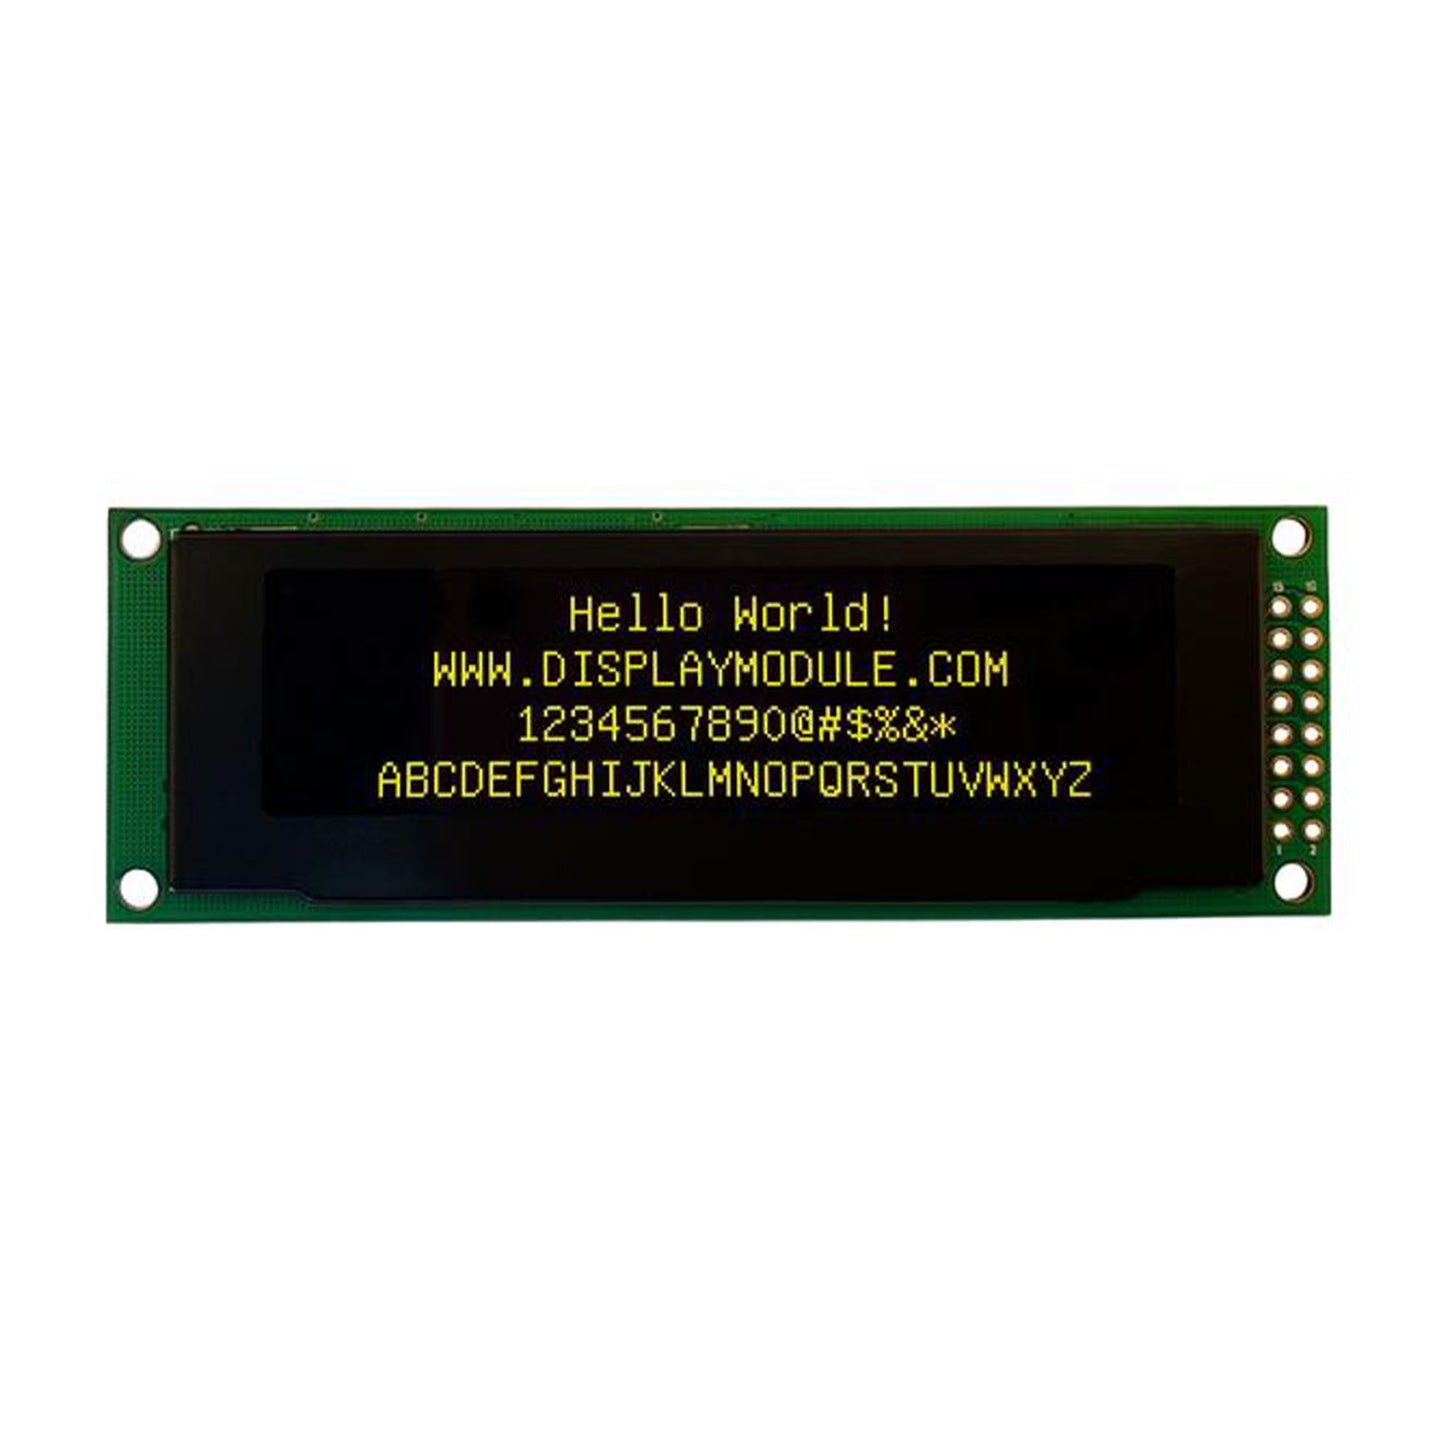 3.2 inch 256x64 yellow OLED screen displaying the text 'Hello World!'